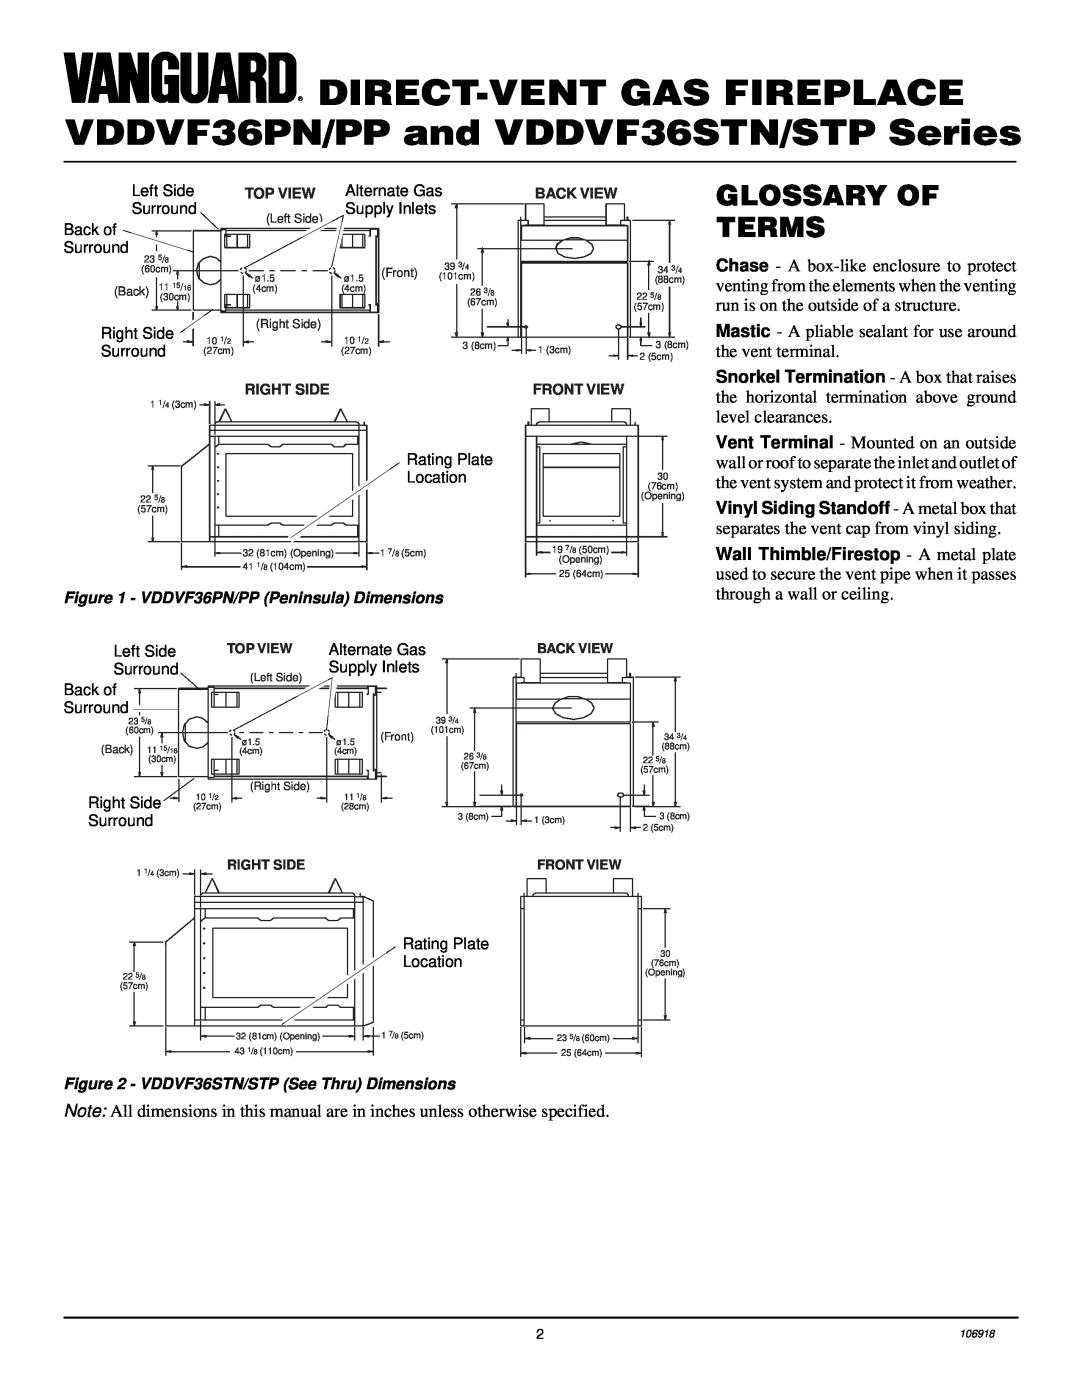 Vanguard Heating installation manual VDDVF36PN/PP and VDDVF36STN/STP Series, Glossary Of Terms, Direct-Ventgas Fireplace 